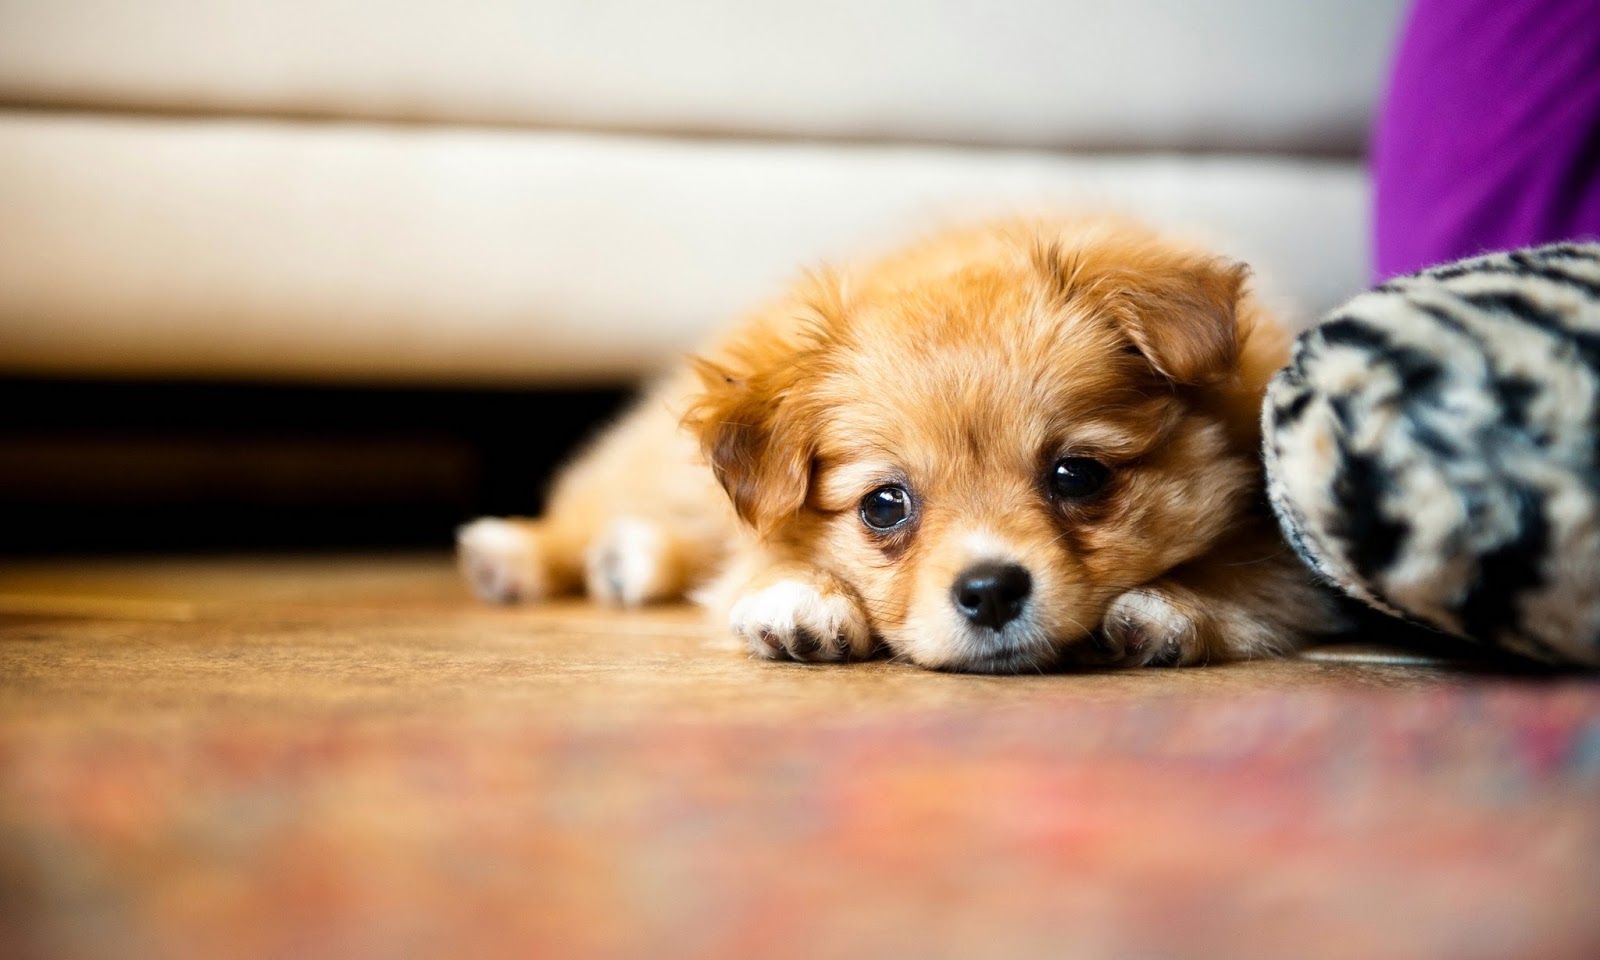 Cute Puppies Wallpapers Free Download - Cute Wallpaper Tiny Puppy - HD Wallpaper 